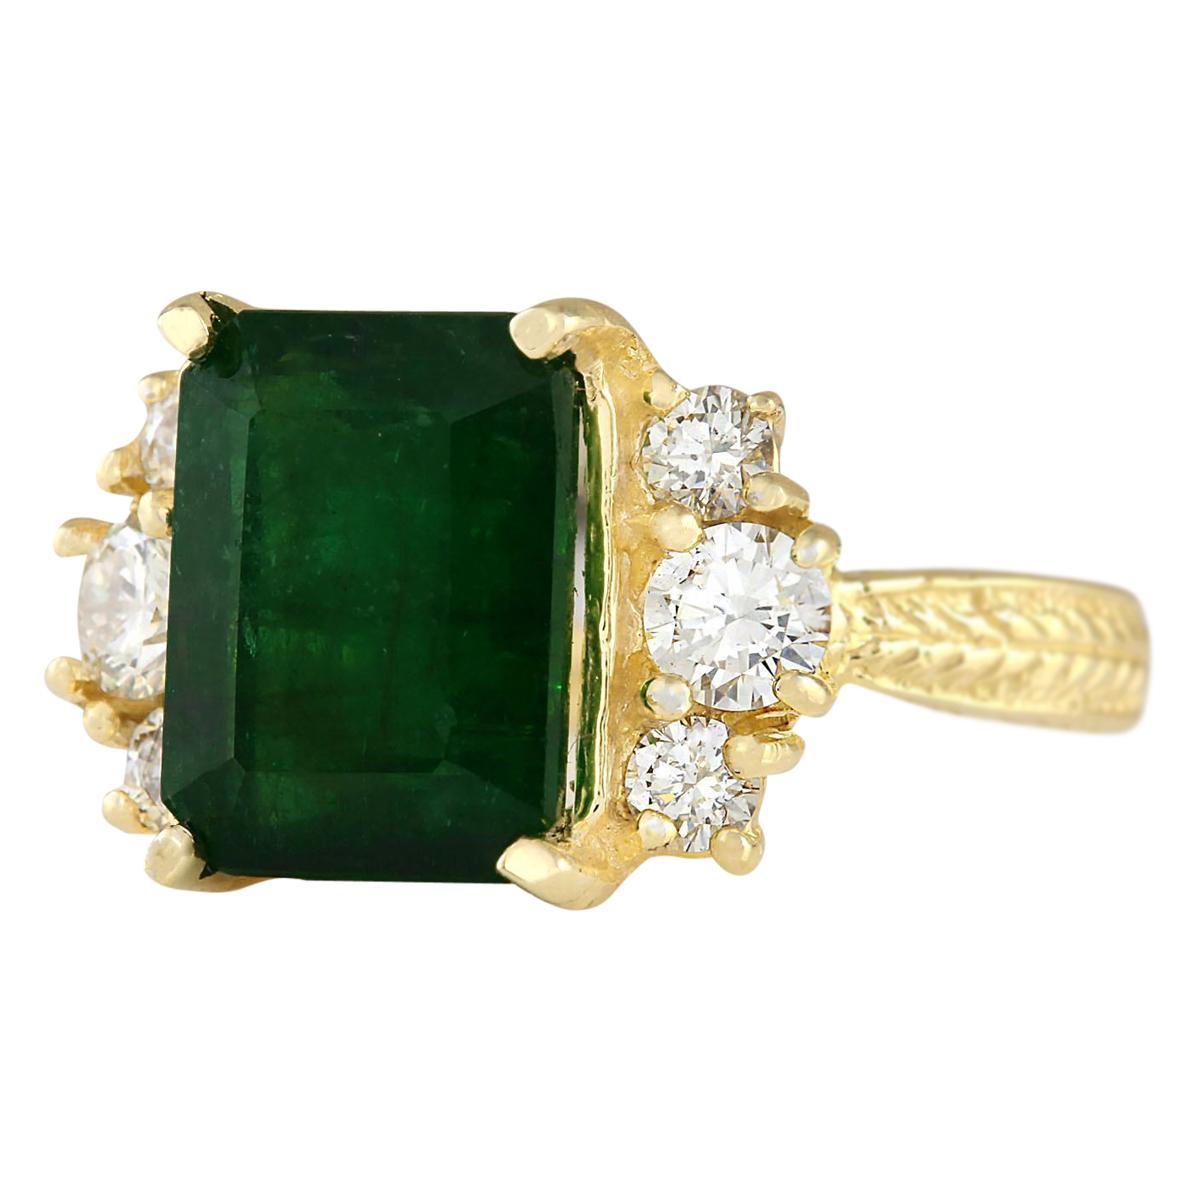 Stamped: 18K Yellow Gold<br>Total Ring Weight: 6.6 Grams<br>Ring Length: N/A<br>Ring Width: N/A<br>Gemstone Weight: Total Natural Emerald Weight is 4.55 Carat (Measures: 10.88x8.25 mm)<br>Color: Green<br>Diamond Weight: Total Natural Diamond Weight